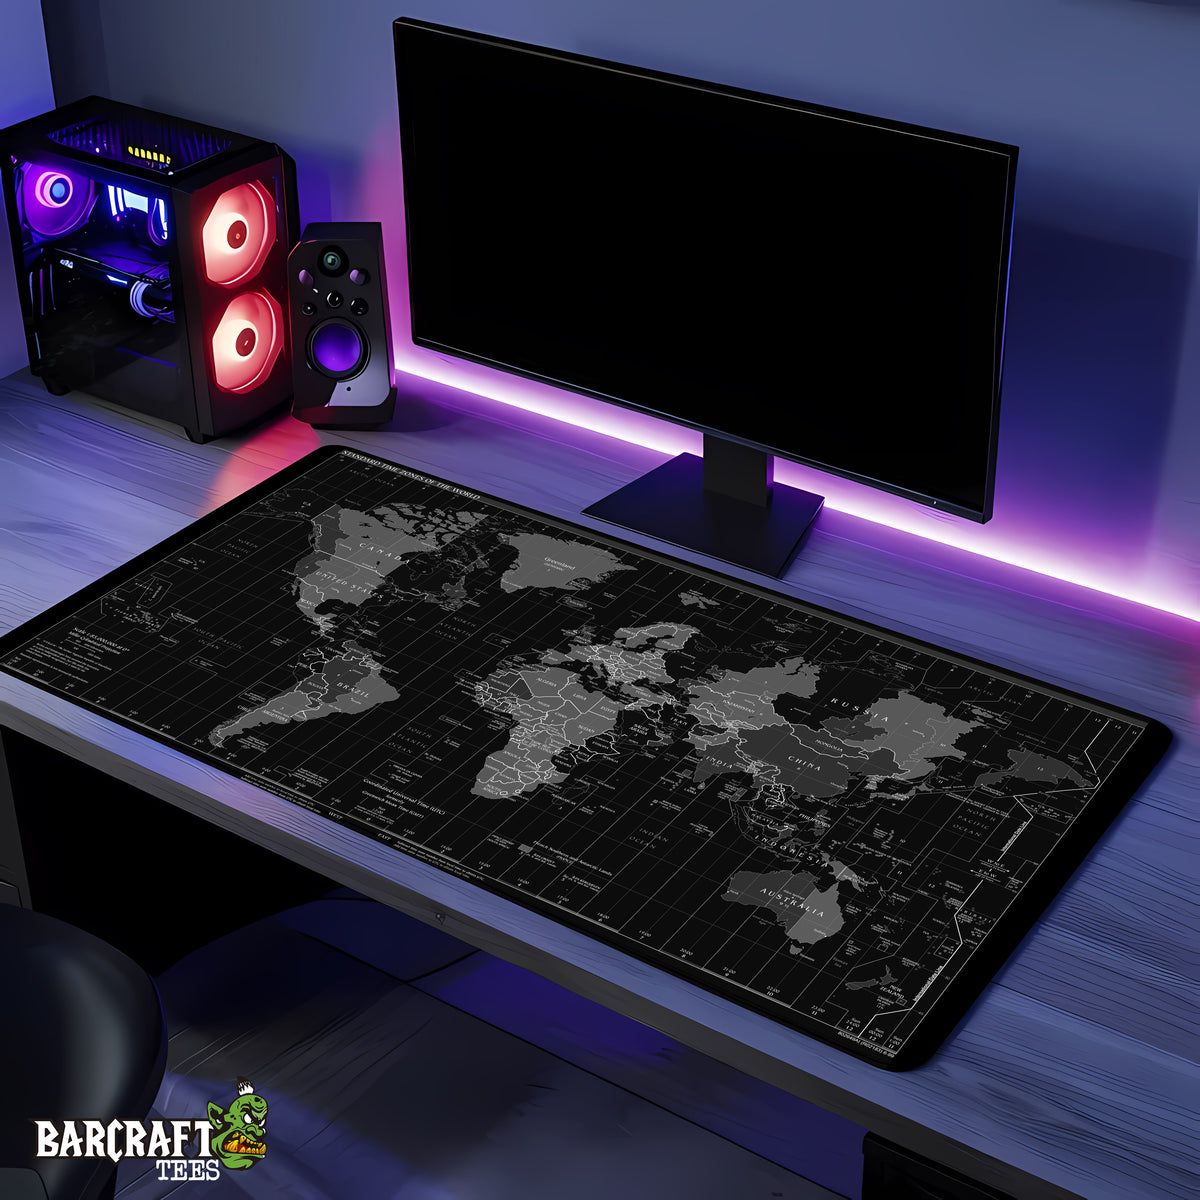 Black World Map Pad Mouse Gaming XL